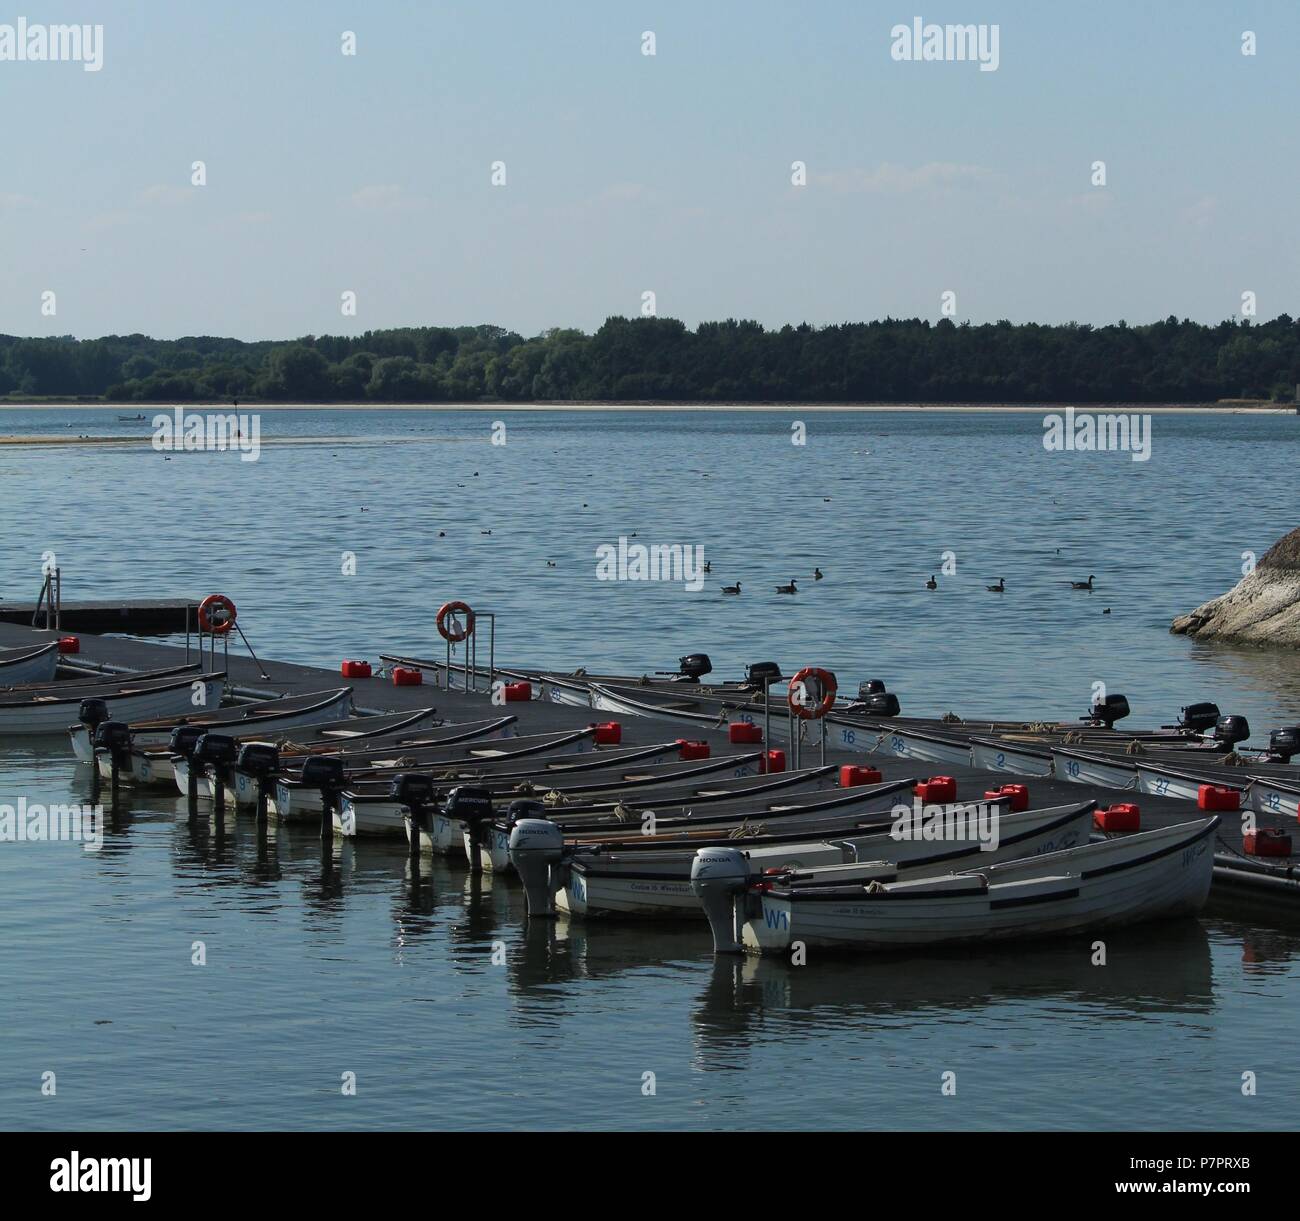 Waterfront scene - A Line of fishing boats moored on the water on a late afternoon at Hanningfield Reservoir, Essex, Britain. Stock Photo